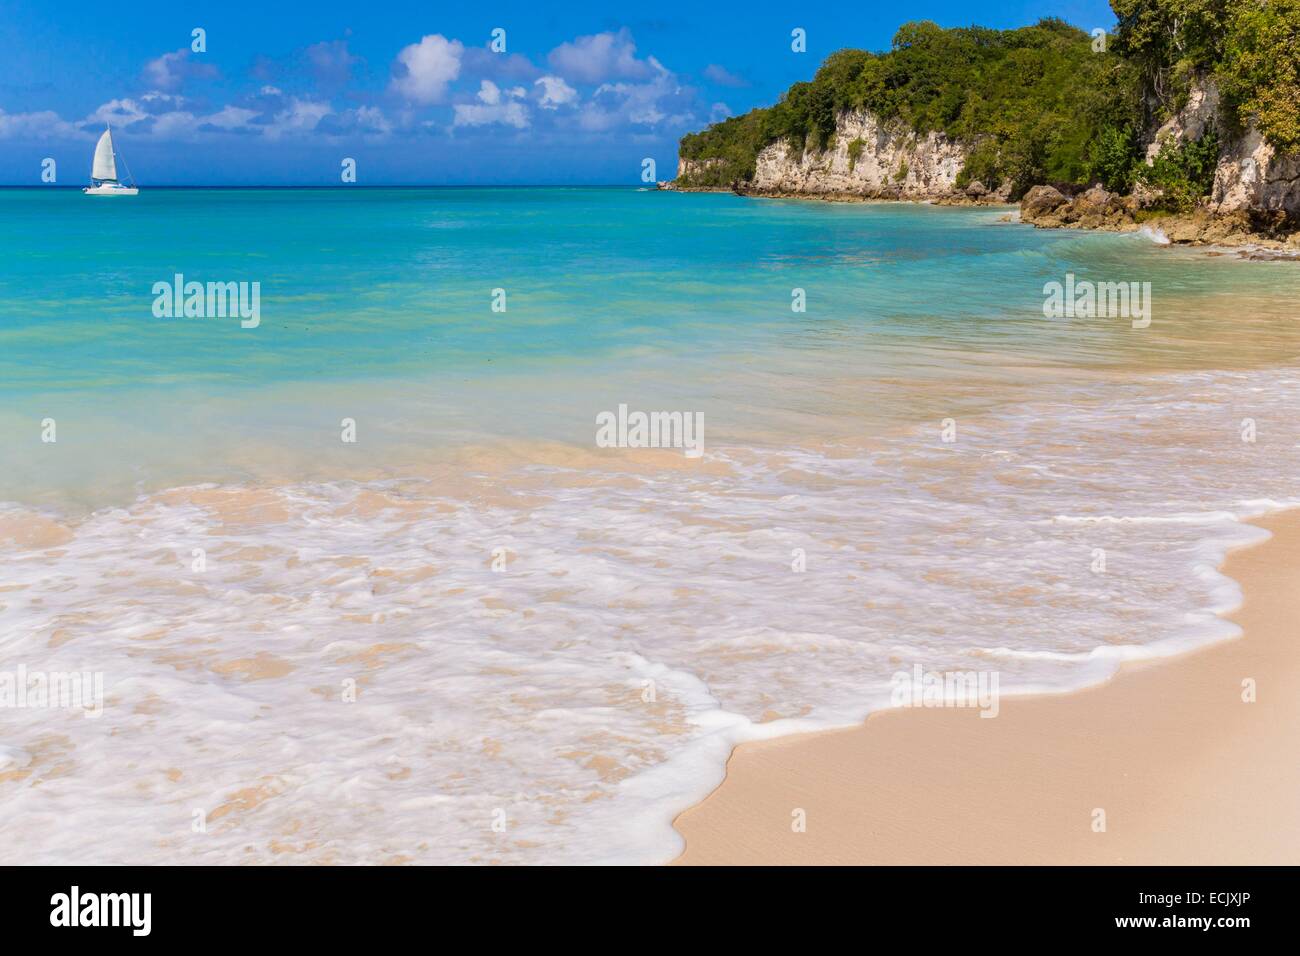 France, Guadeloupe (French West Indies), Marie Galante, Saint Louis, Anse Canot beach with catamaran off Stock Photo